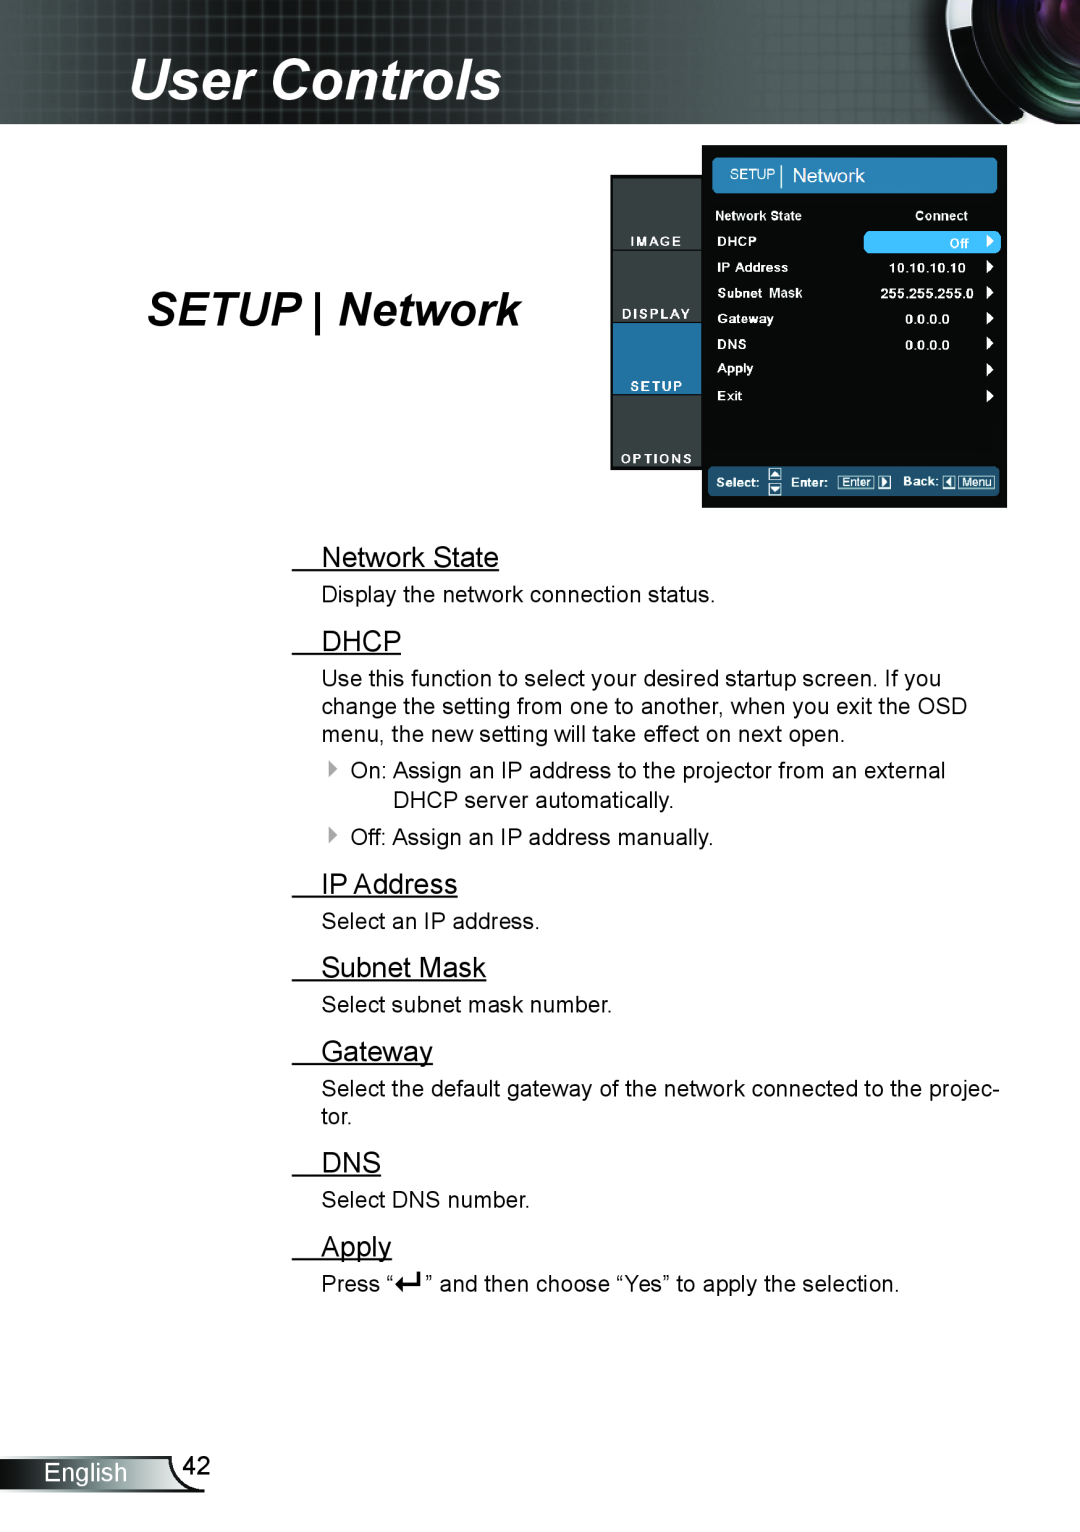 Optoma Technology TH7500NL SETUP Network, Network State, Dhcp, IP Address, Subnet Mask, Gateway, Apply, User Controls 